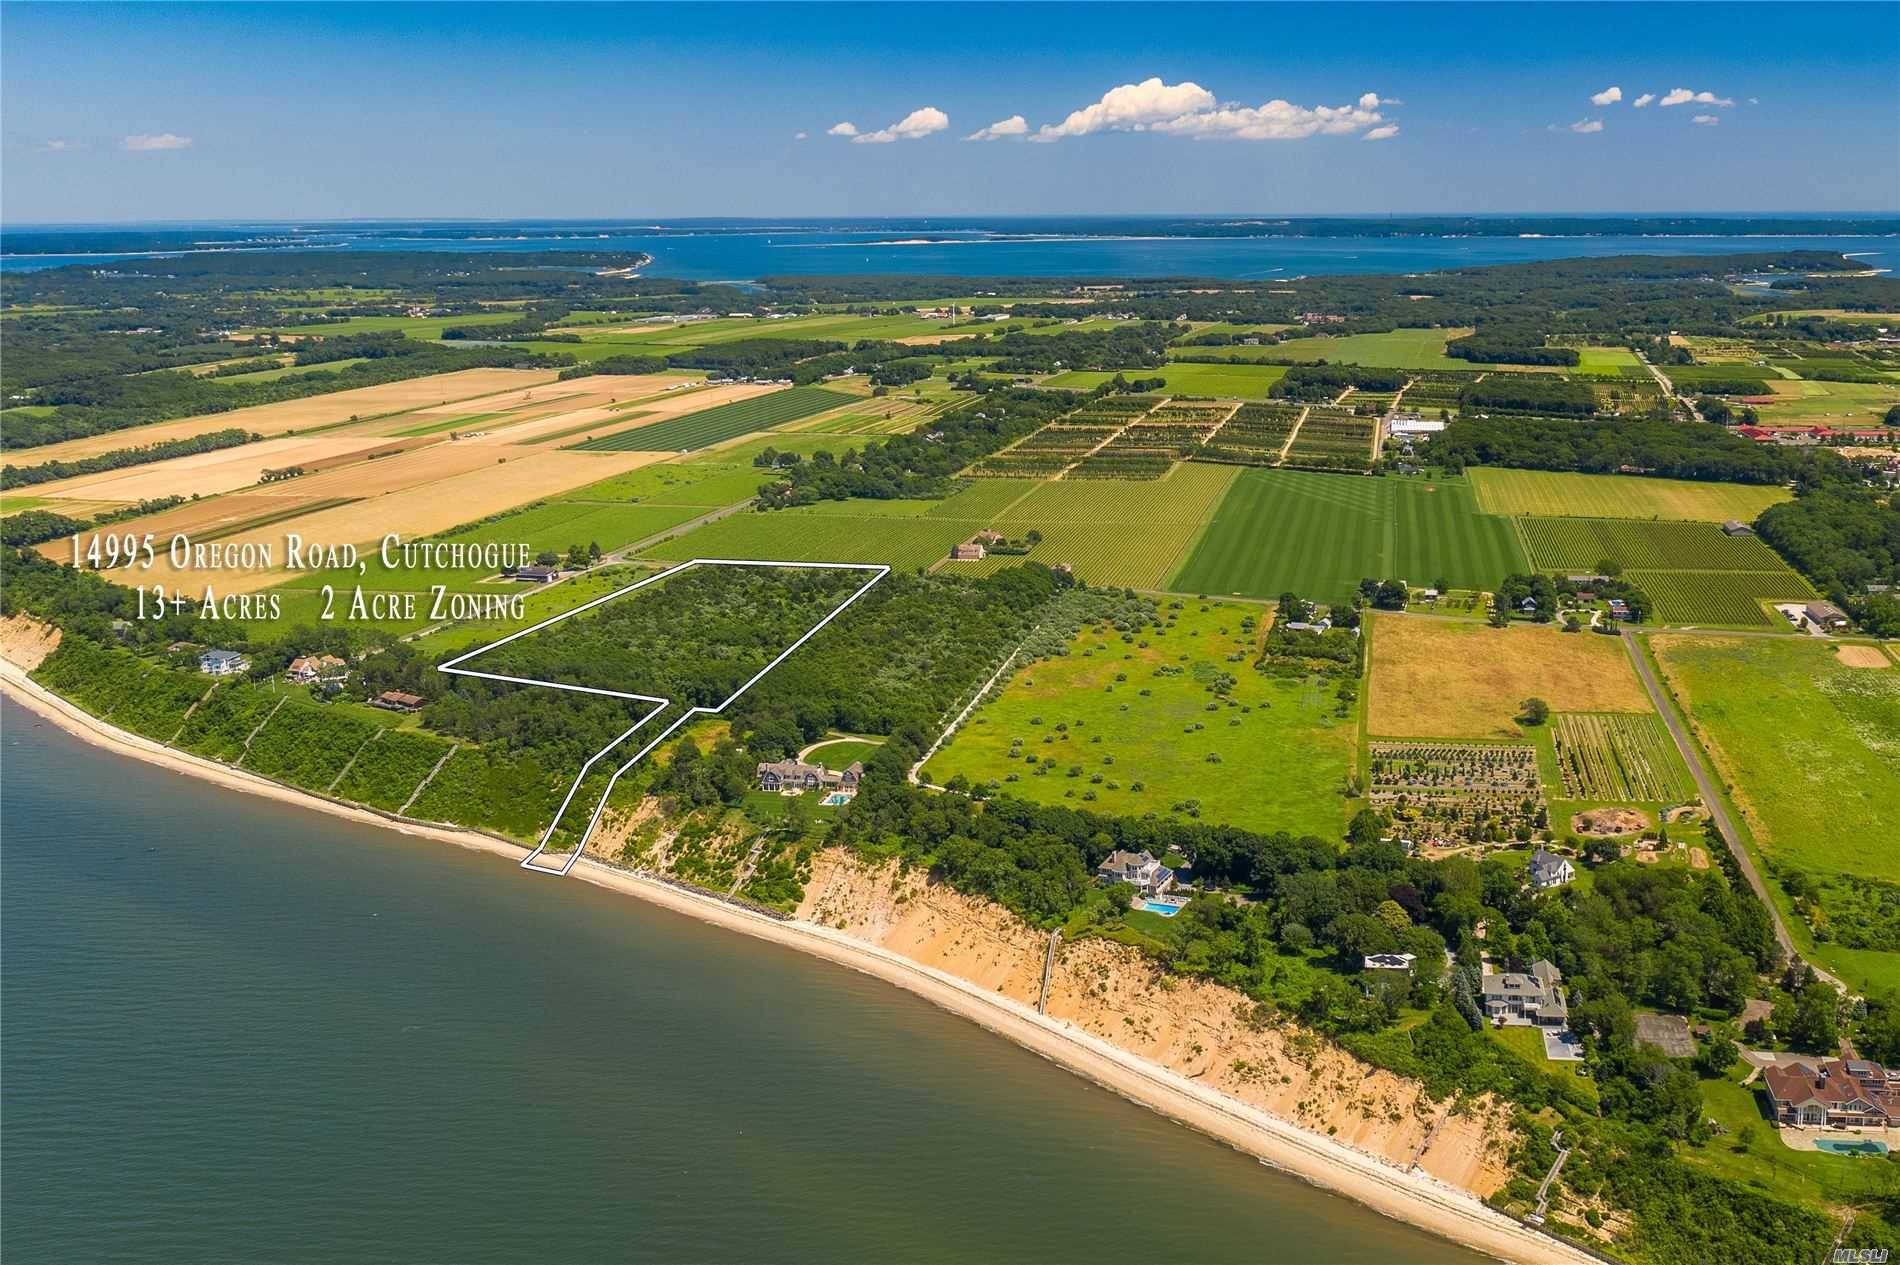 Located in the heart of Long Island Wine Country, this flat 13.